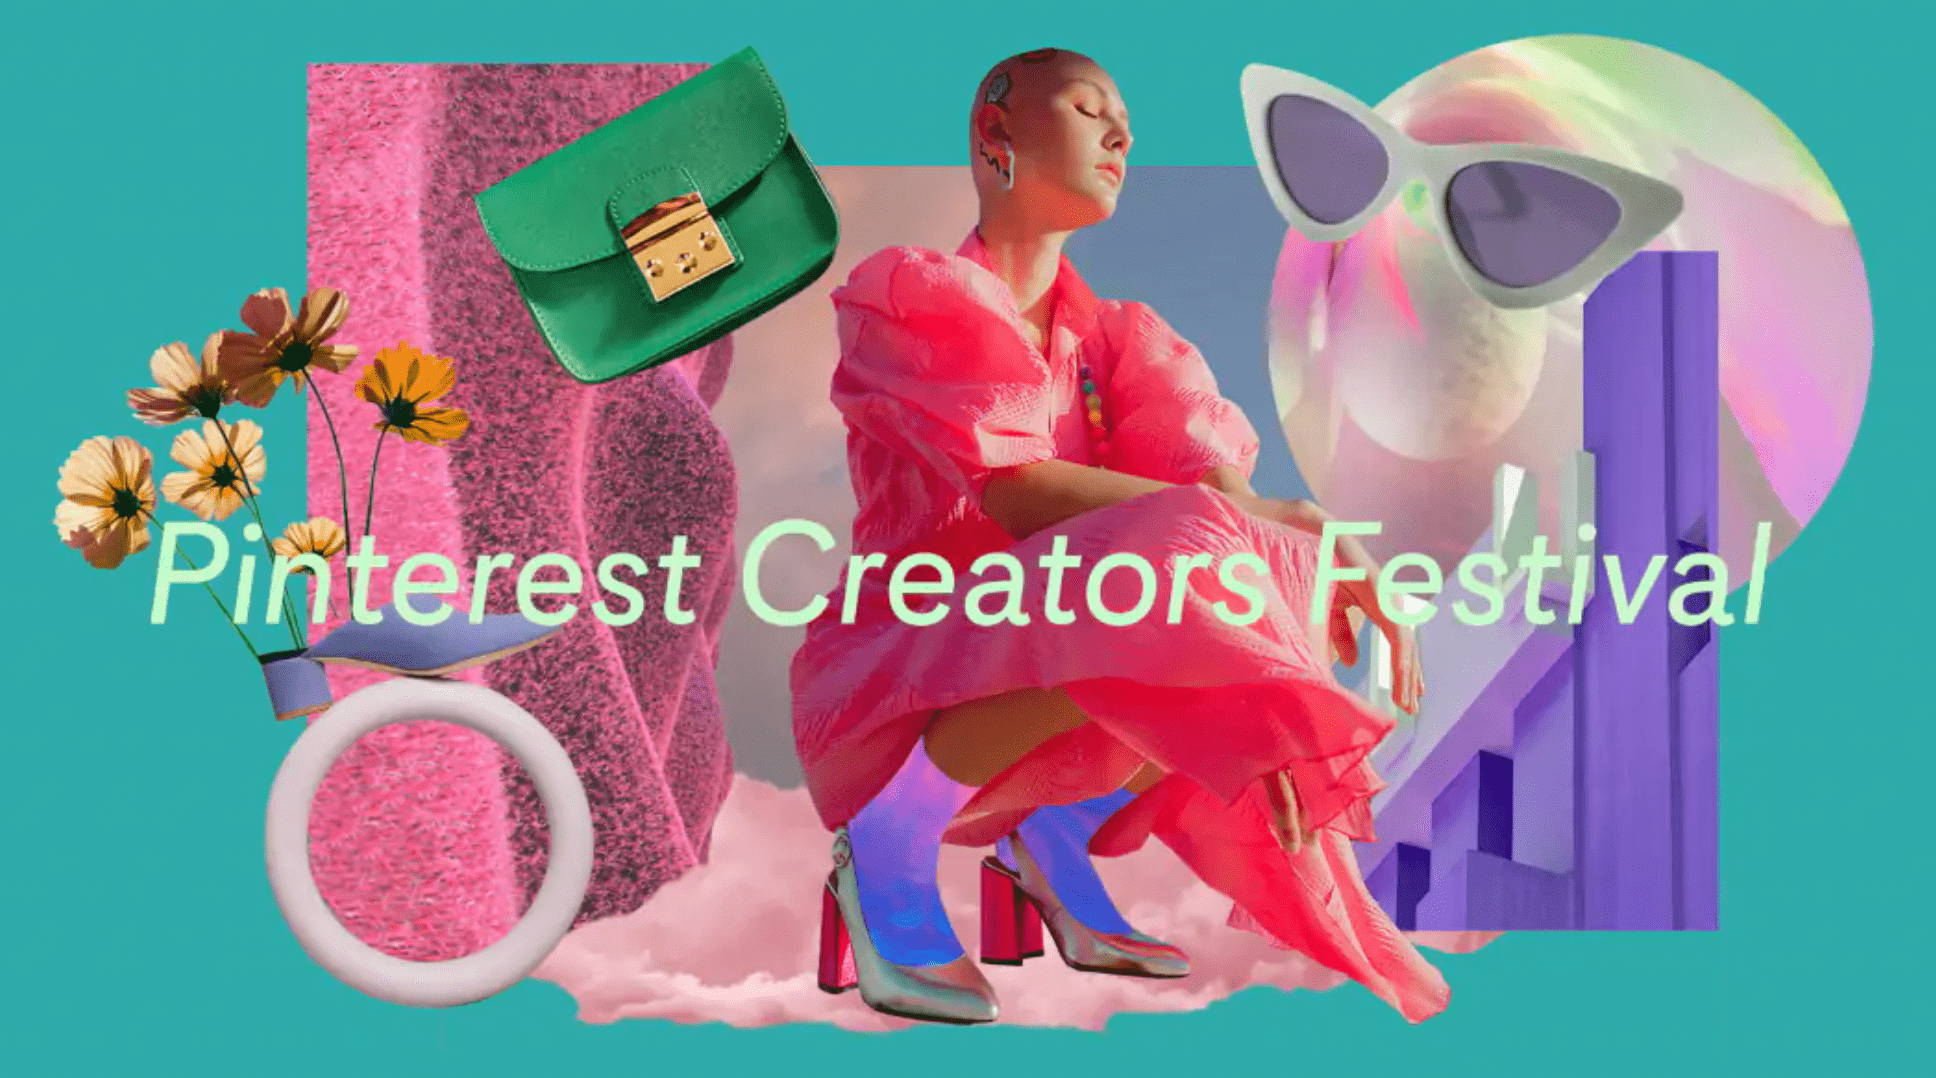 Creator's Festival was a marketing campaign that Pinterest promoted on all its social channels.